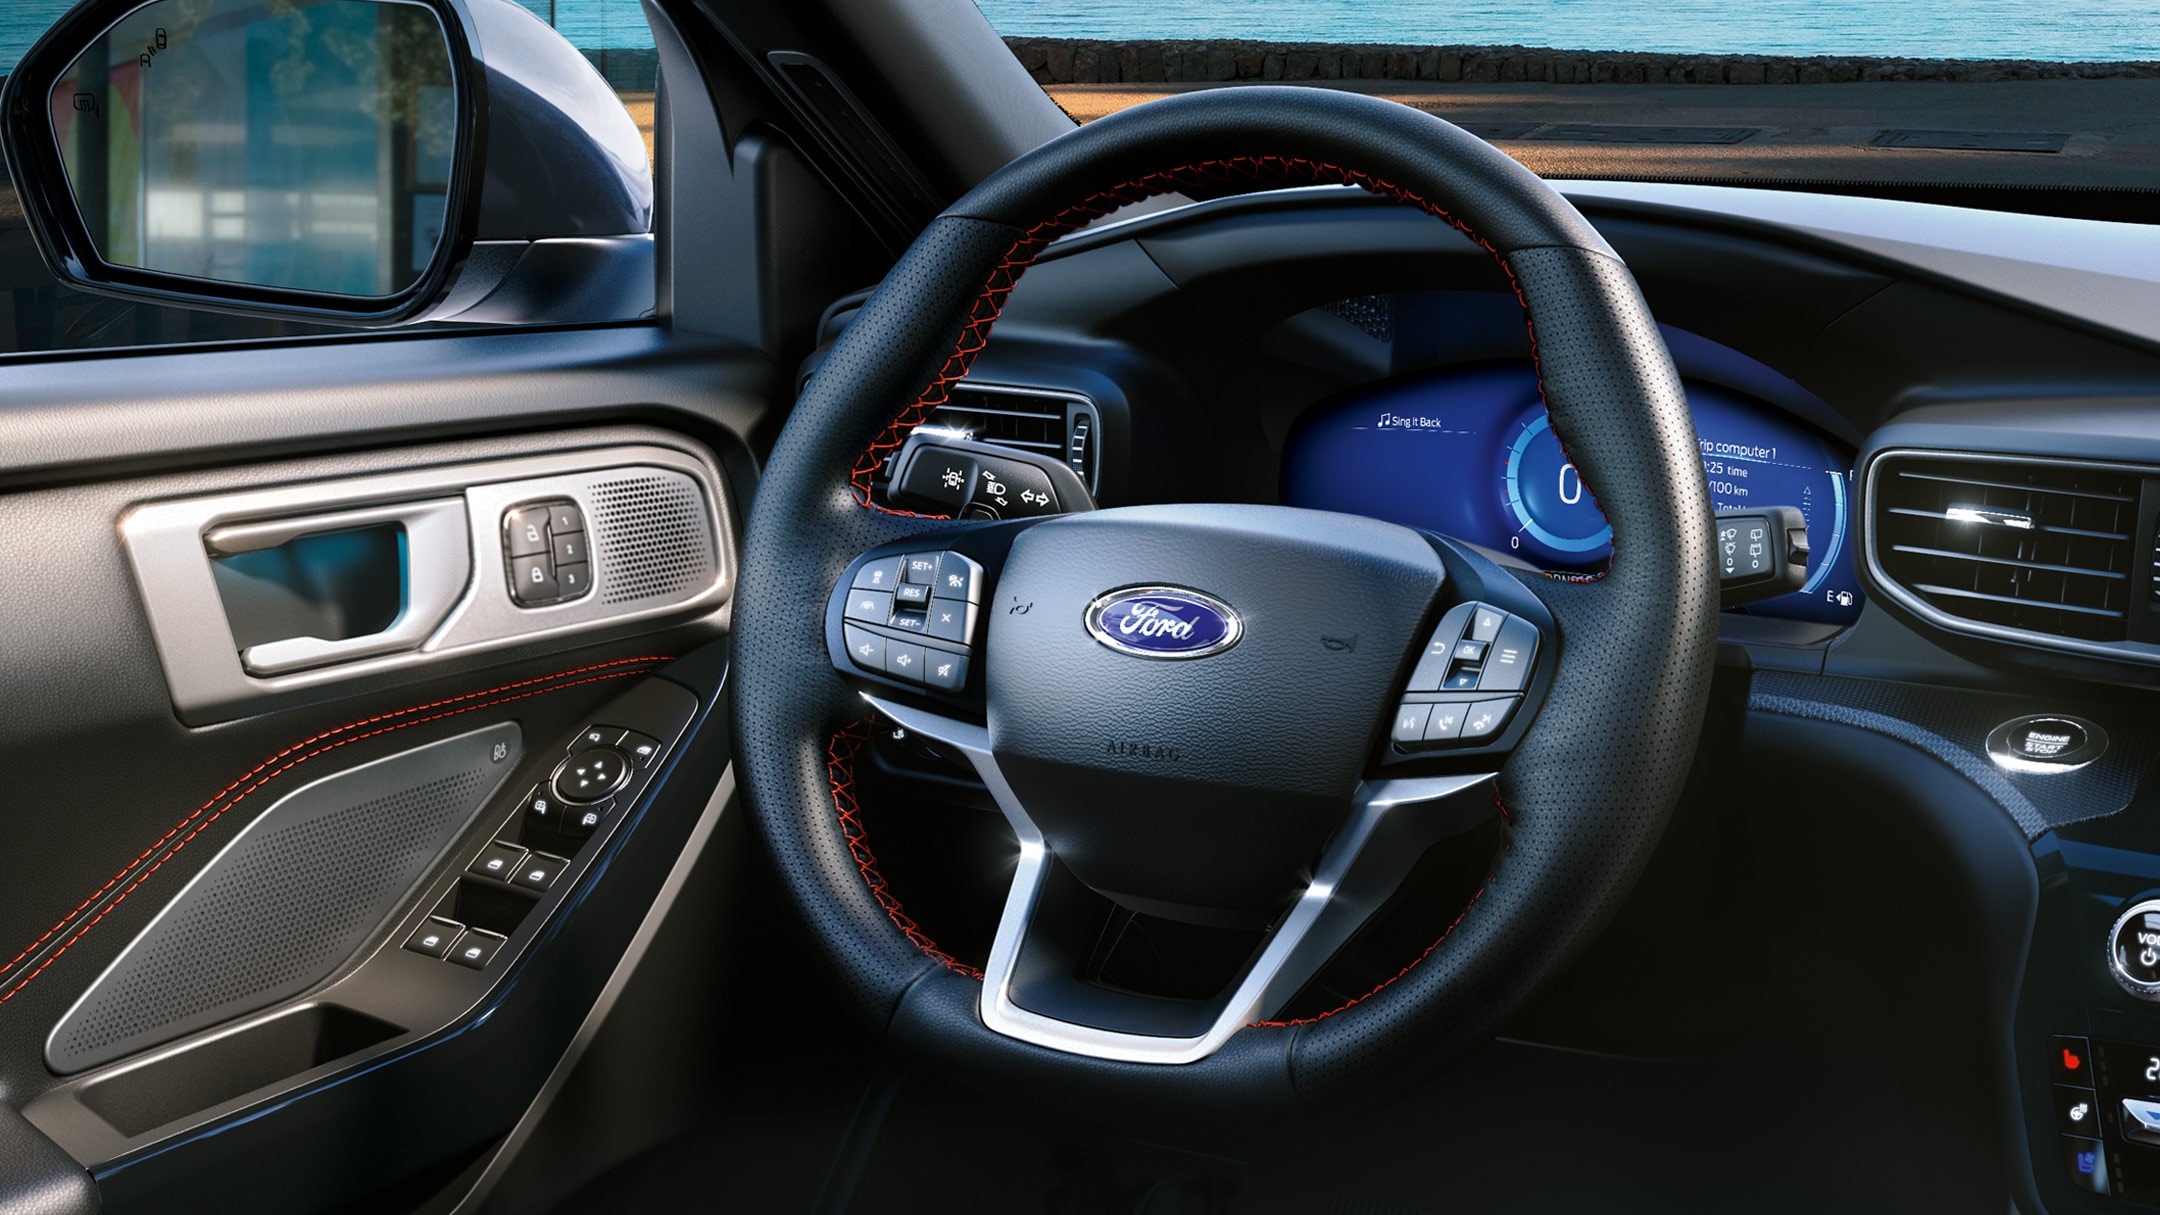 Ford Explorer interior with steering wheel and paddle shifters